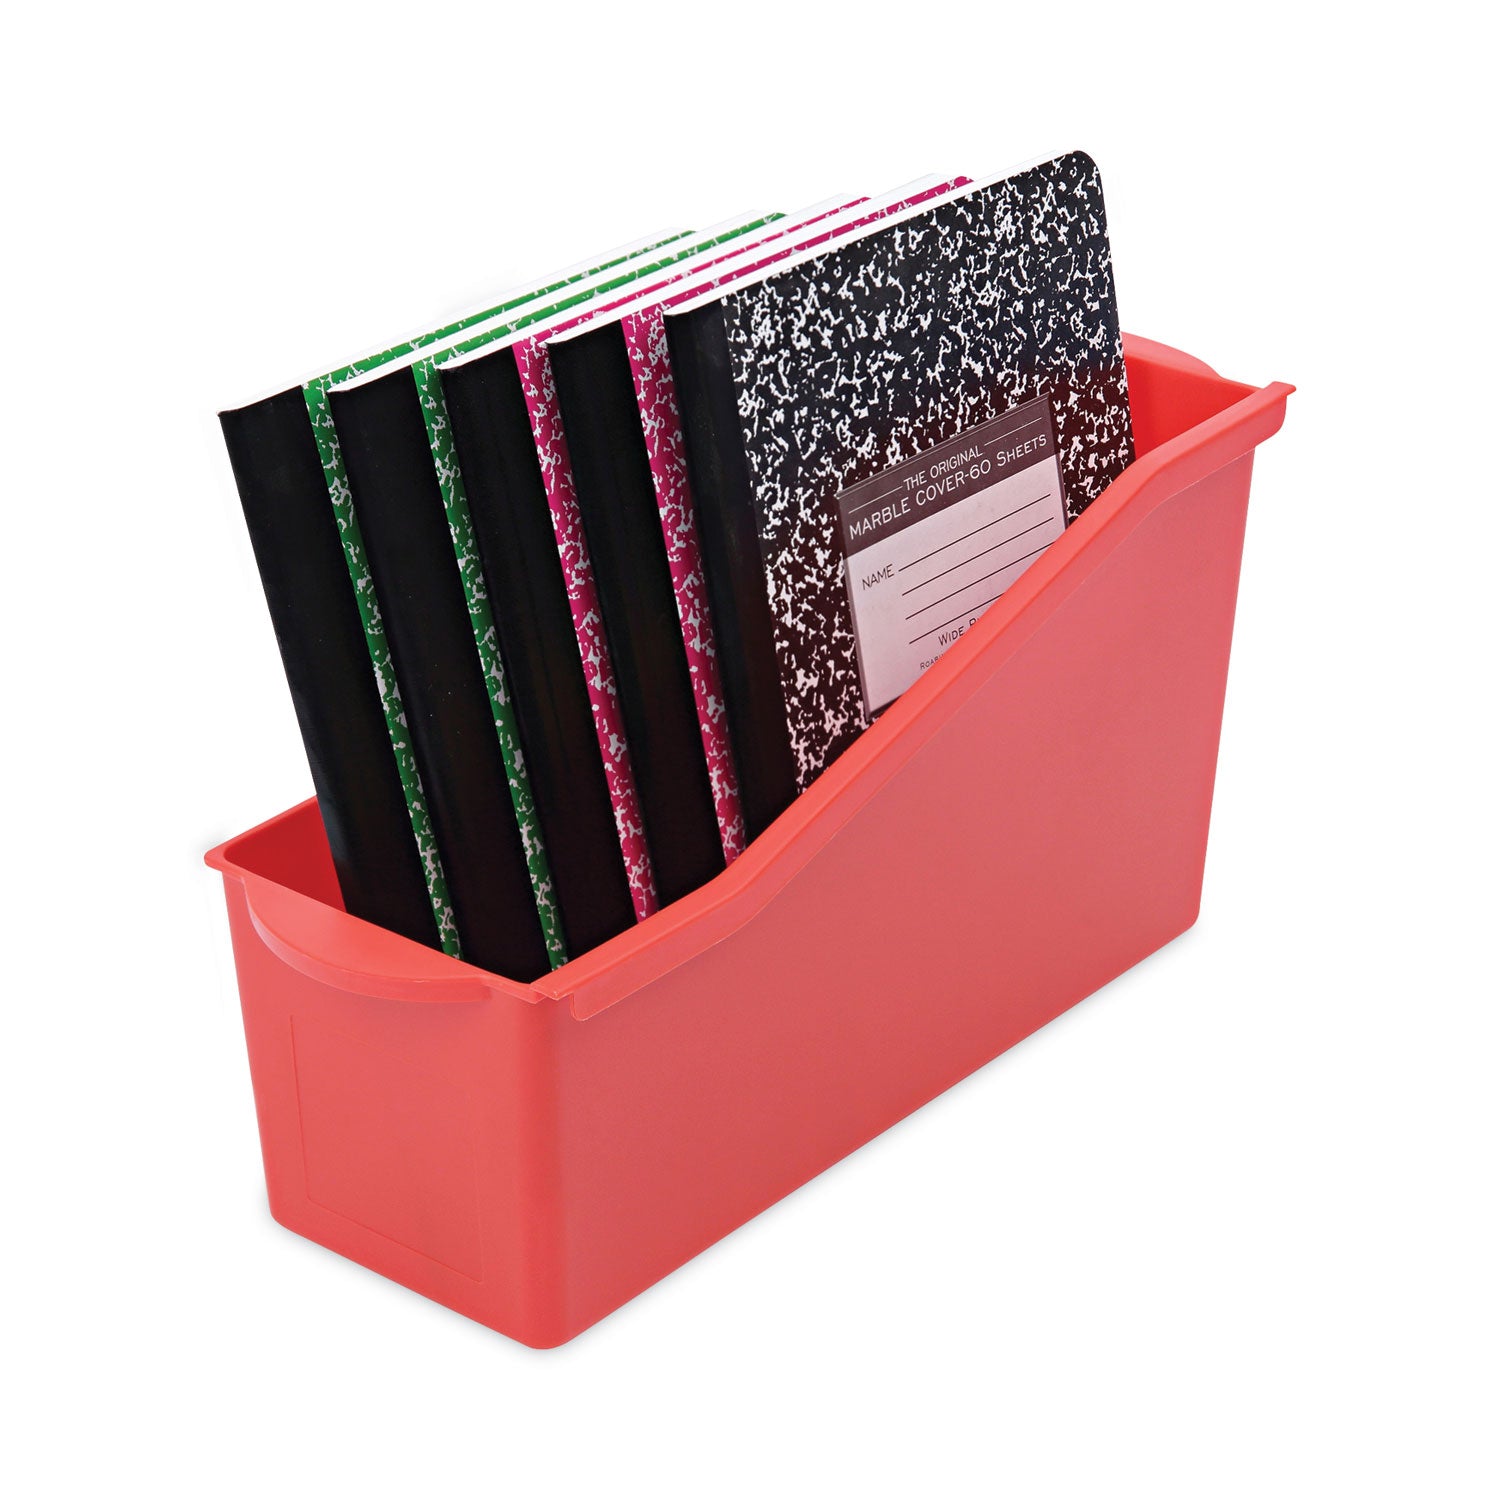 antimicrobial-book-bin-142-x-534-x-735-red_def39508red - 3